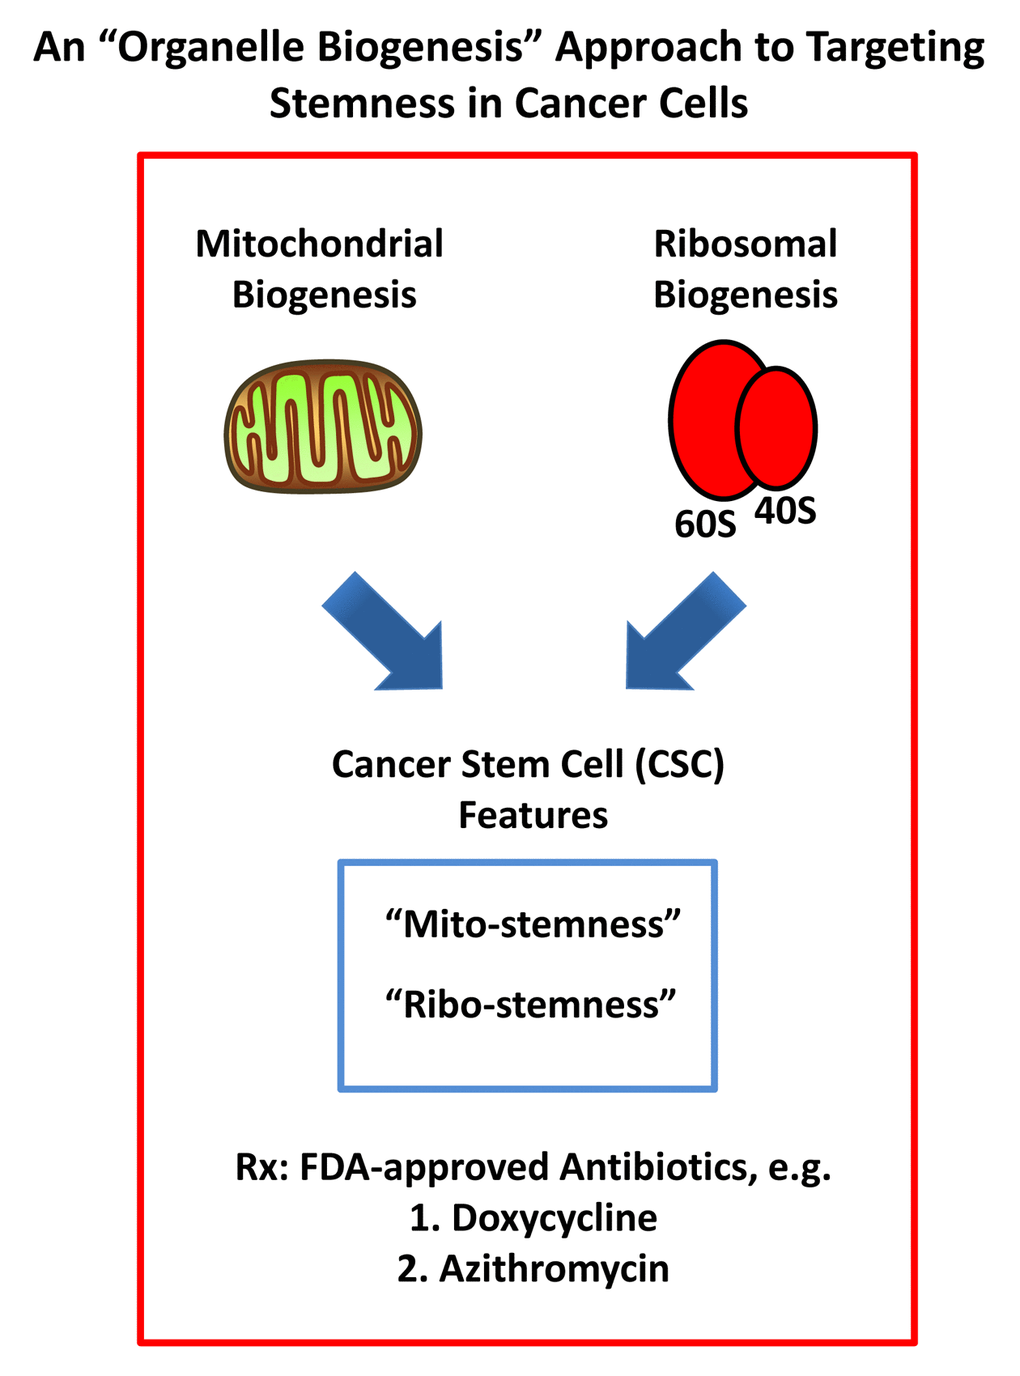 An “organelle biogenesis” approach to cancer therapy. A schematic diagram illustrating that breast cancer cells in co-culture increase their “mito-stemness” and “ribo-stemness” features is shown. Note the increases in mitochondrial biogenesis and the protein synthesis machinery, as enumerated in Supplementary Tables 1 to 4 and independently confirmed by Ingenuity Pathway Analysis (IPA). These findings predict increased susceptibility to treatment with FDA-approved antibiotics, such as Doxycycline and Azithromycin.